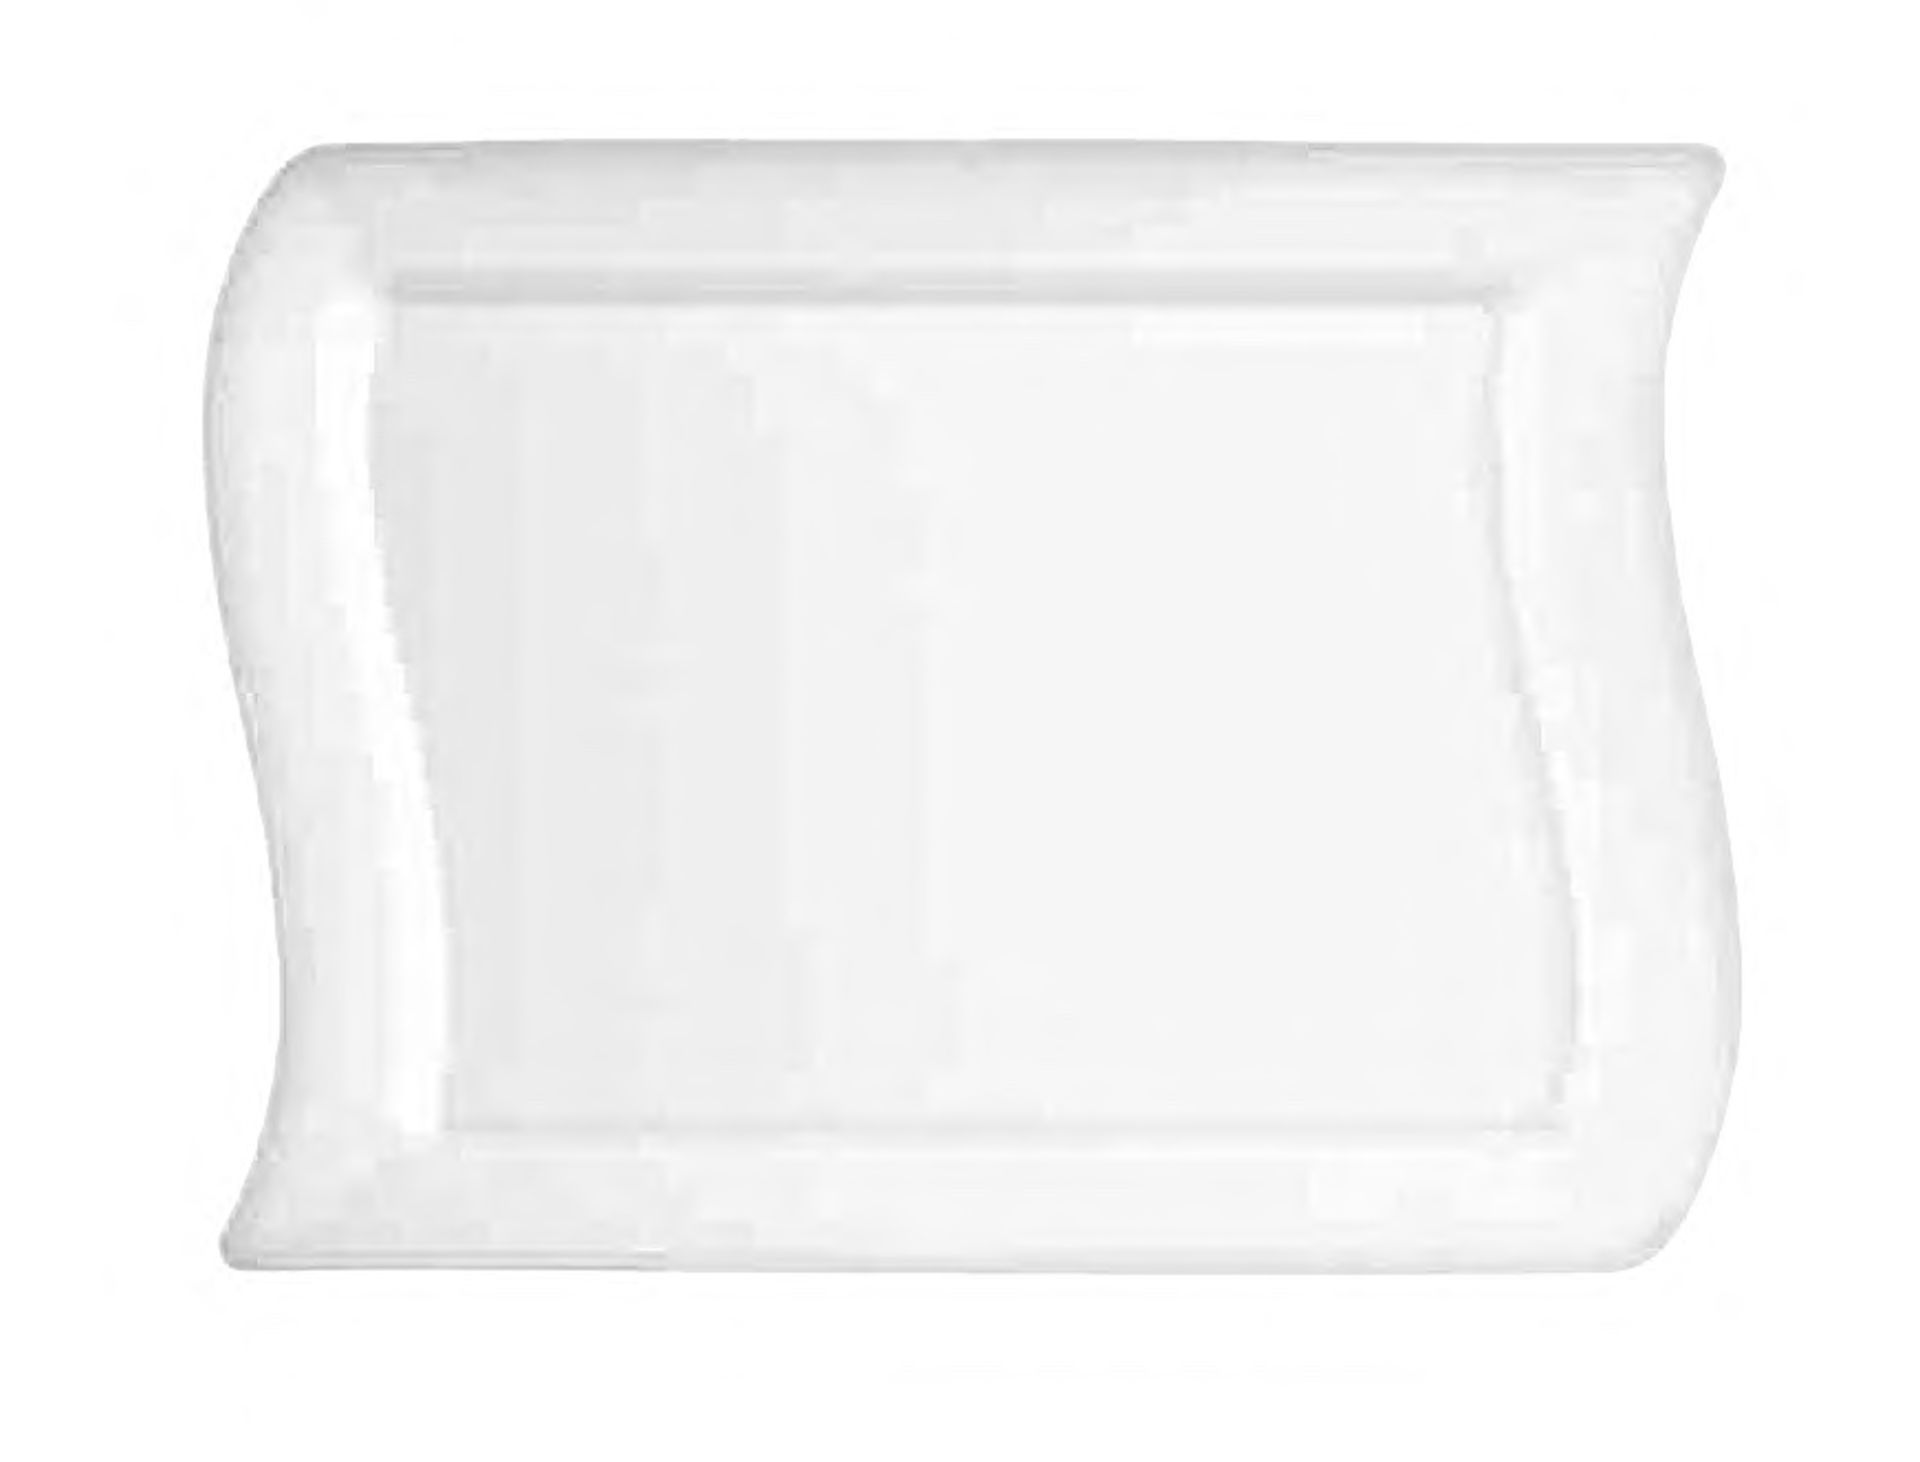 7" X 12" Wavy Rectangle Plate Mold